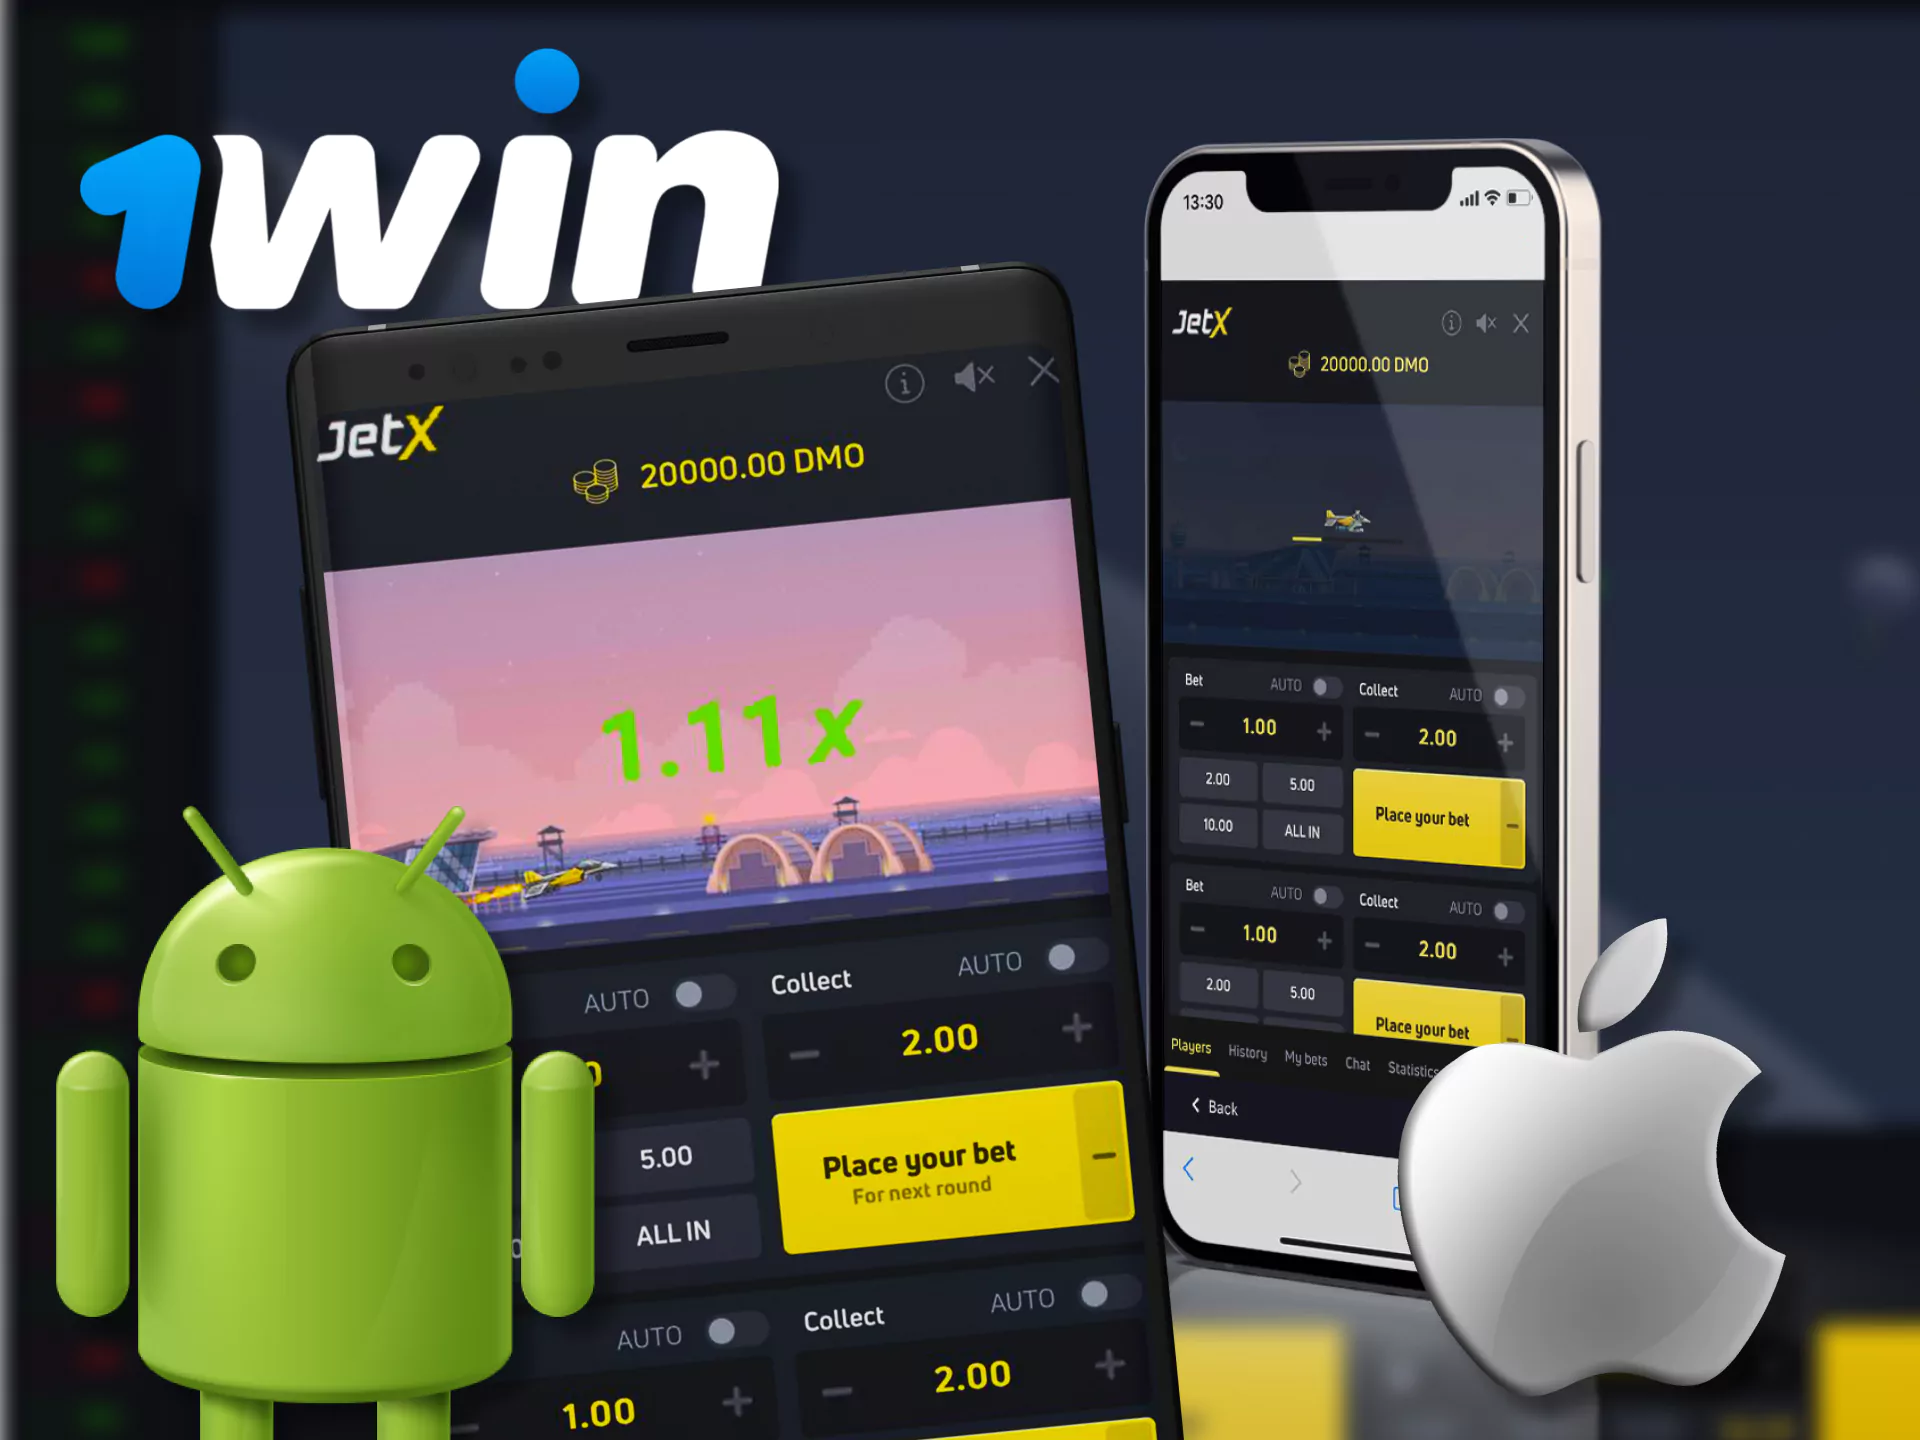 Are You Struggling With jetx game? Let's Chat